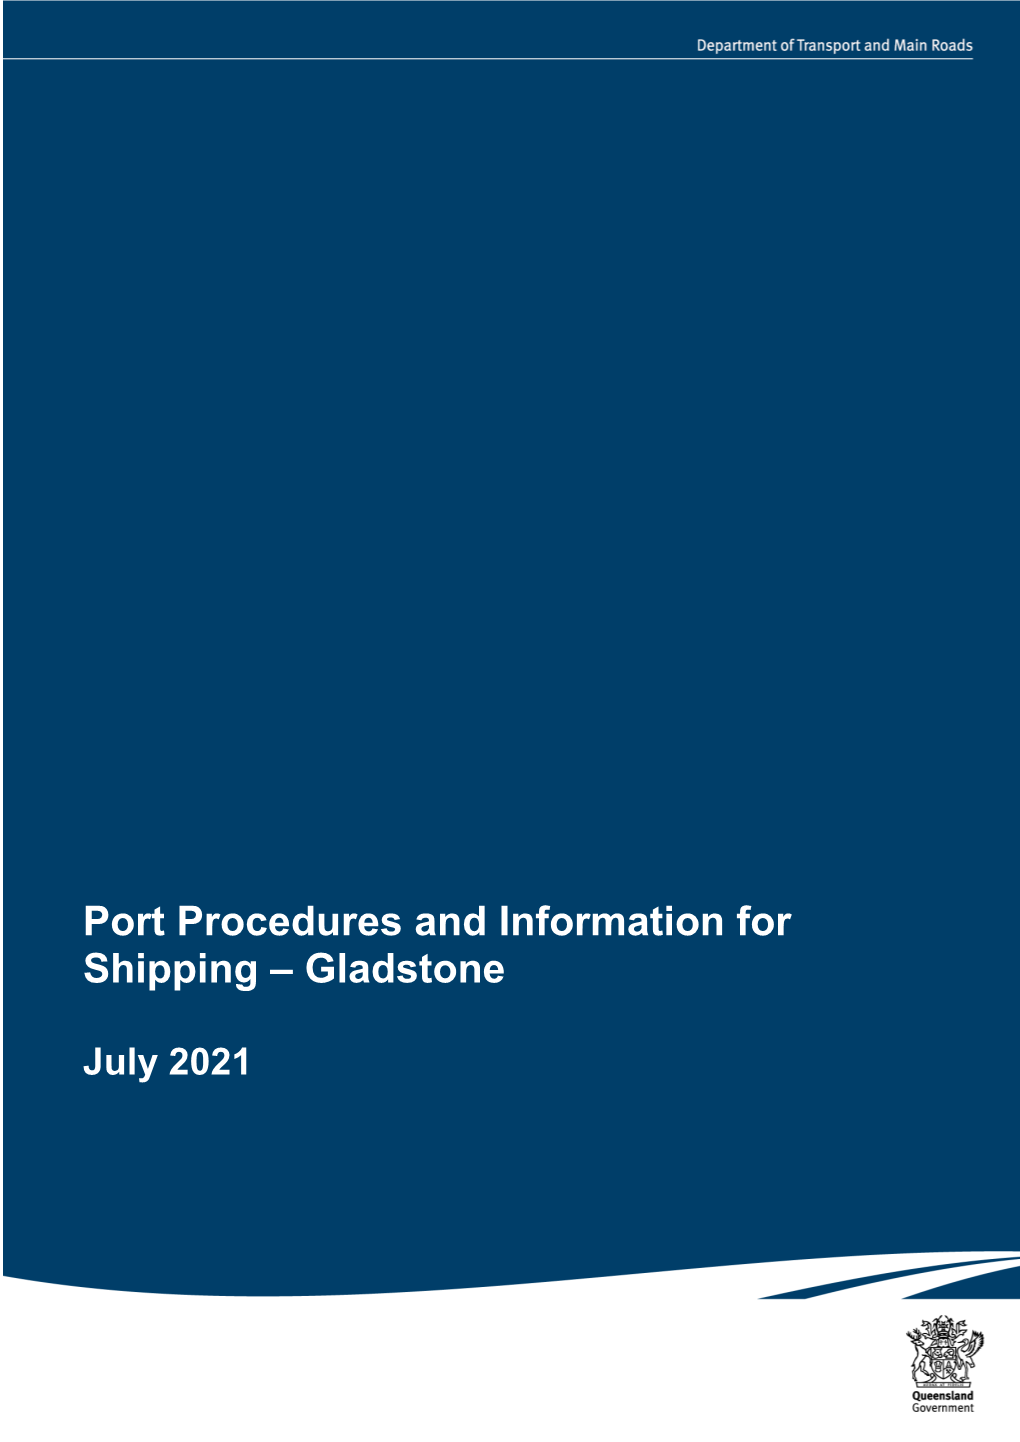 Port Procedures and Information for Shipping – Gladstone